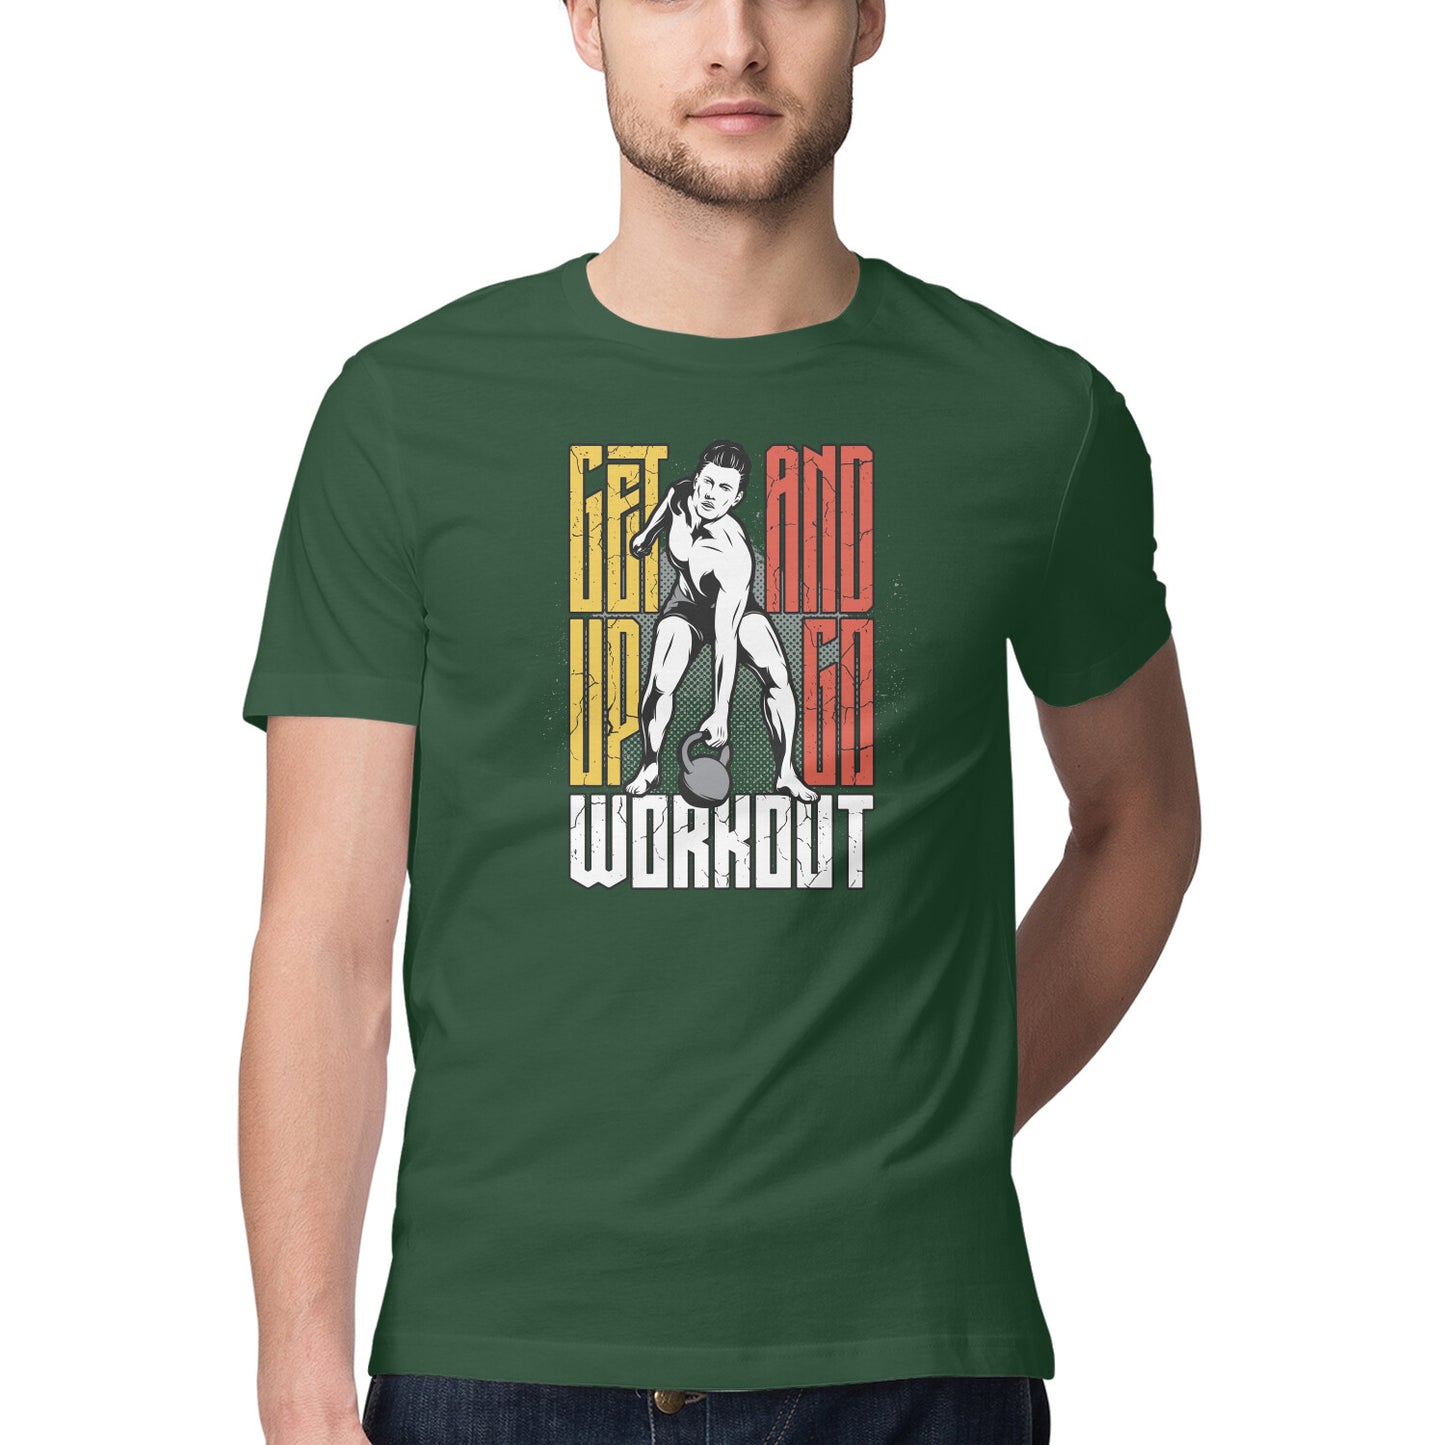 Get up and go workout GYM Motivation Printed T-Shirt